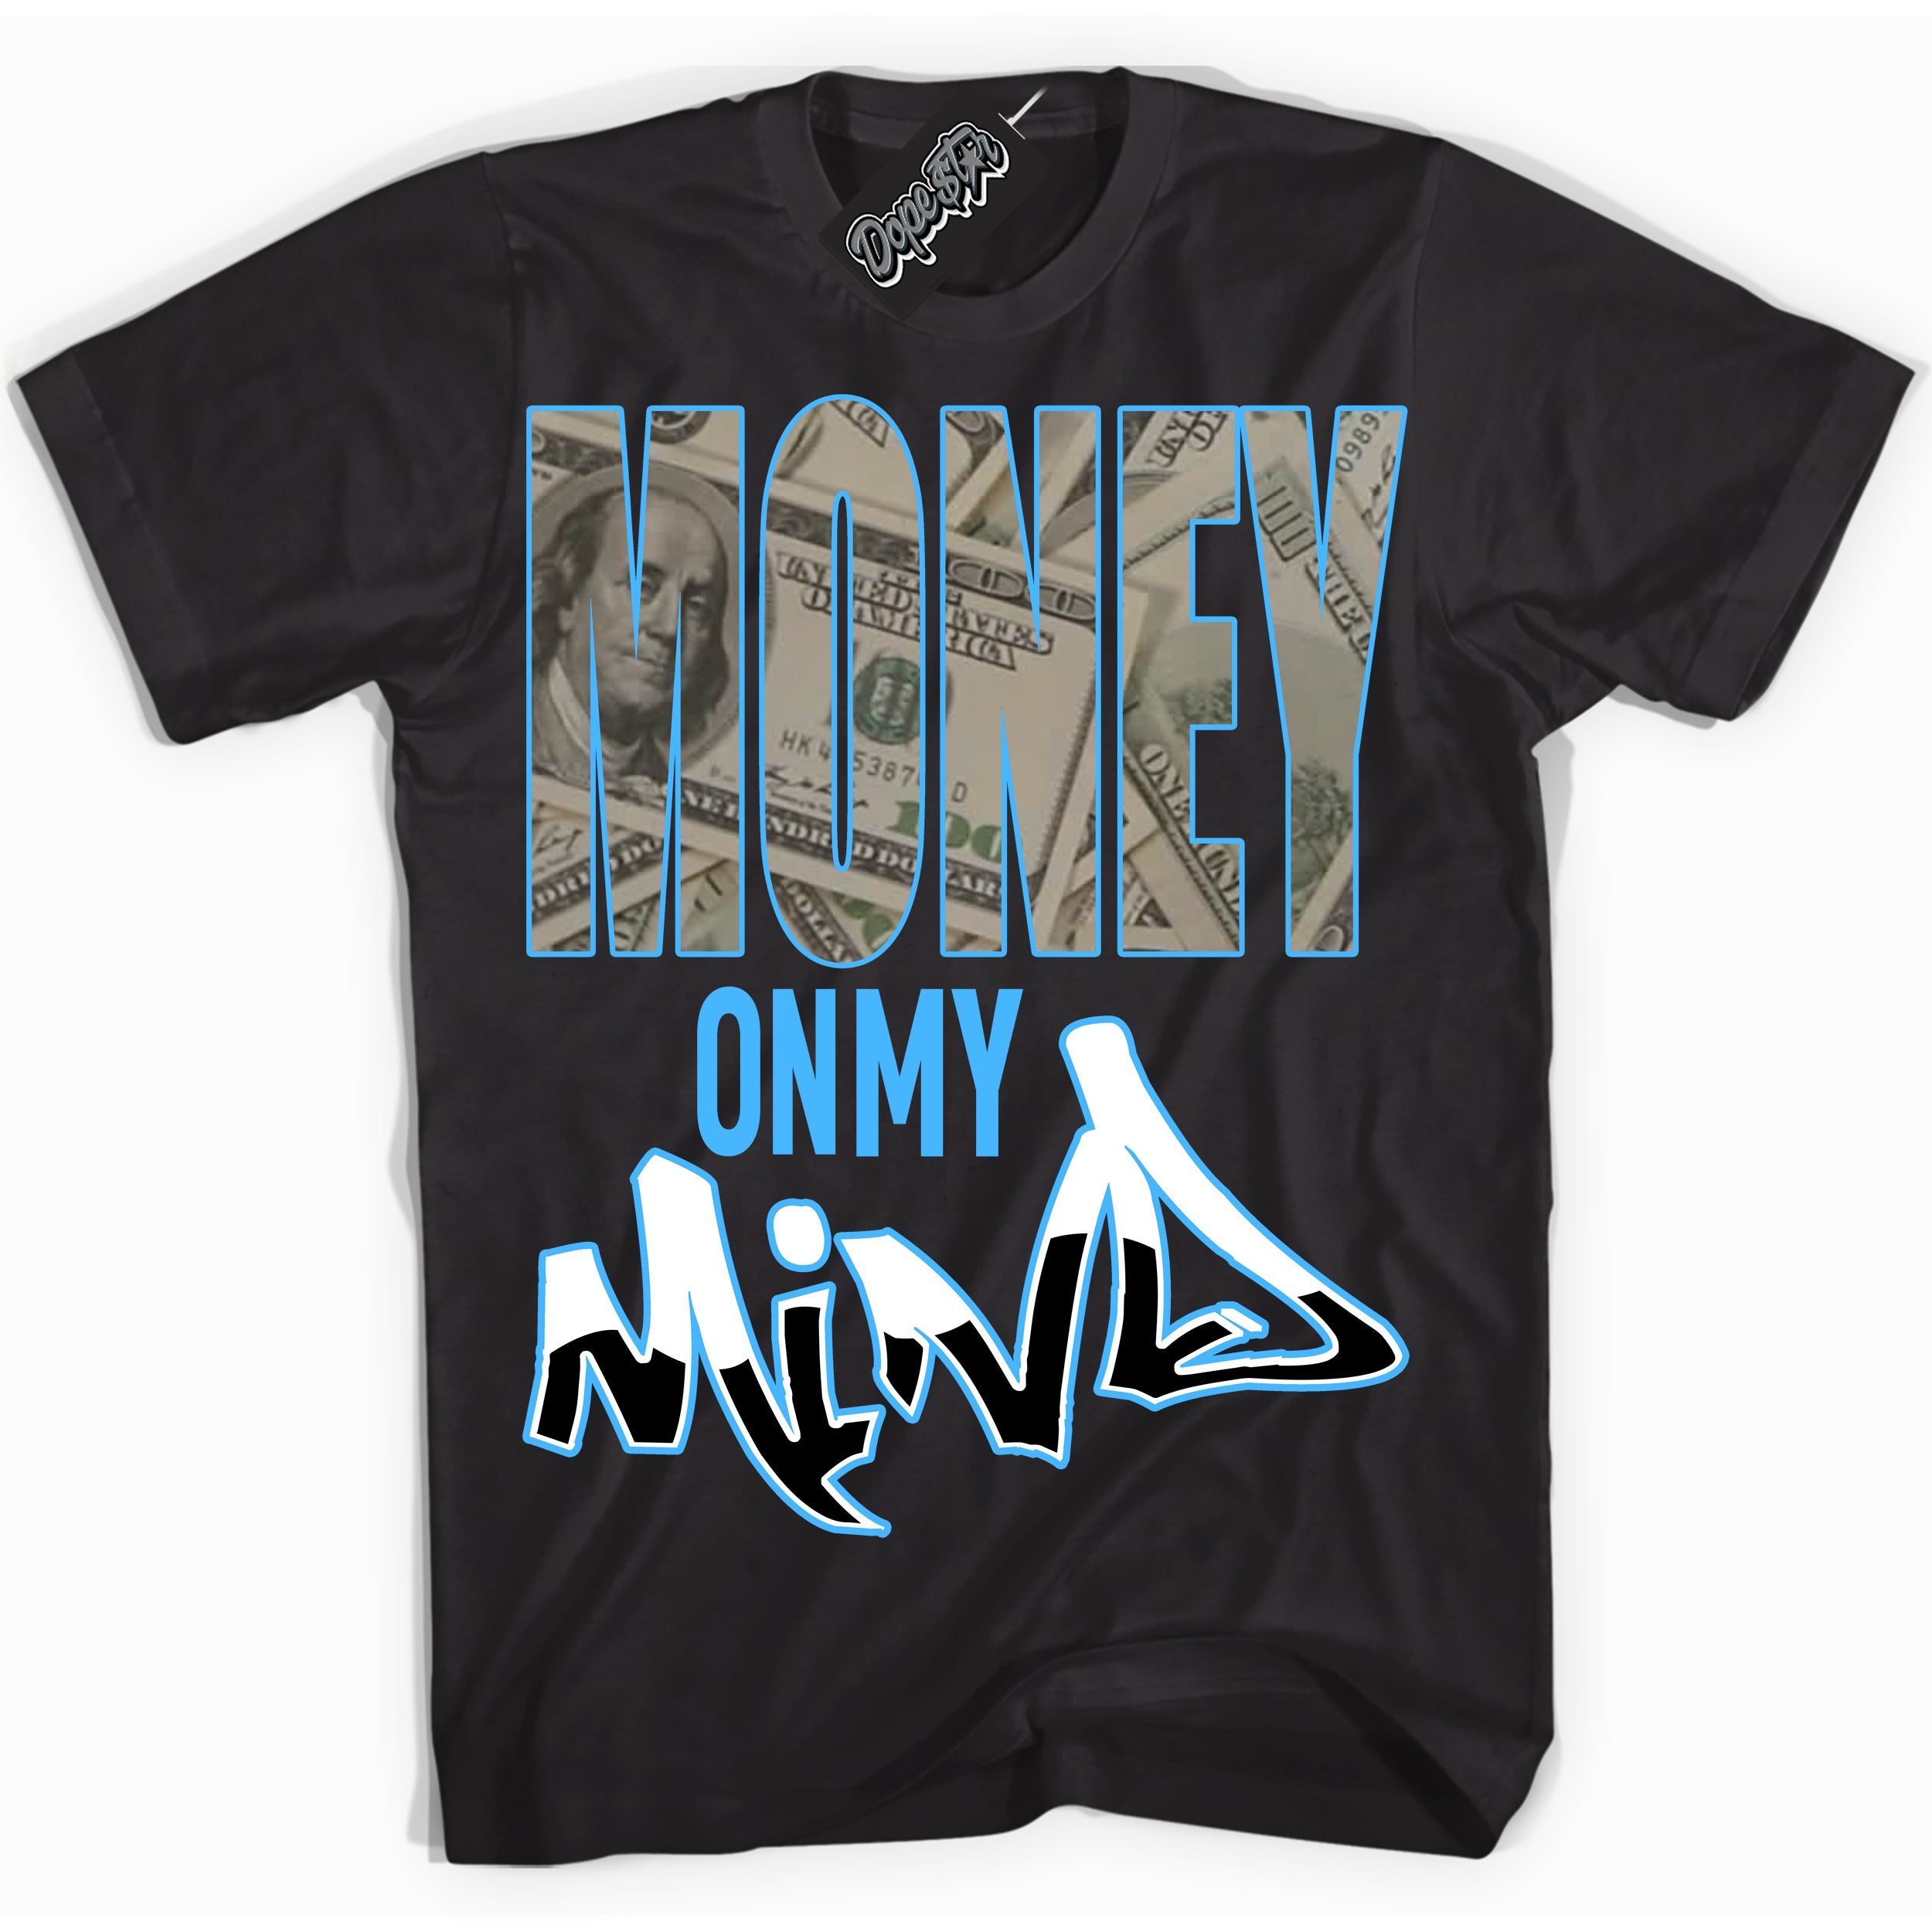 Cool Black graphic tee with “ Money On My Mind ” design, that perfectly matches Powder Blue 9s sneakers 